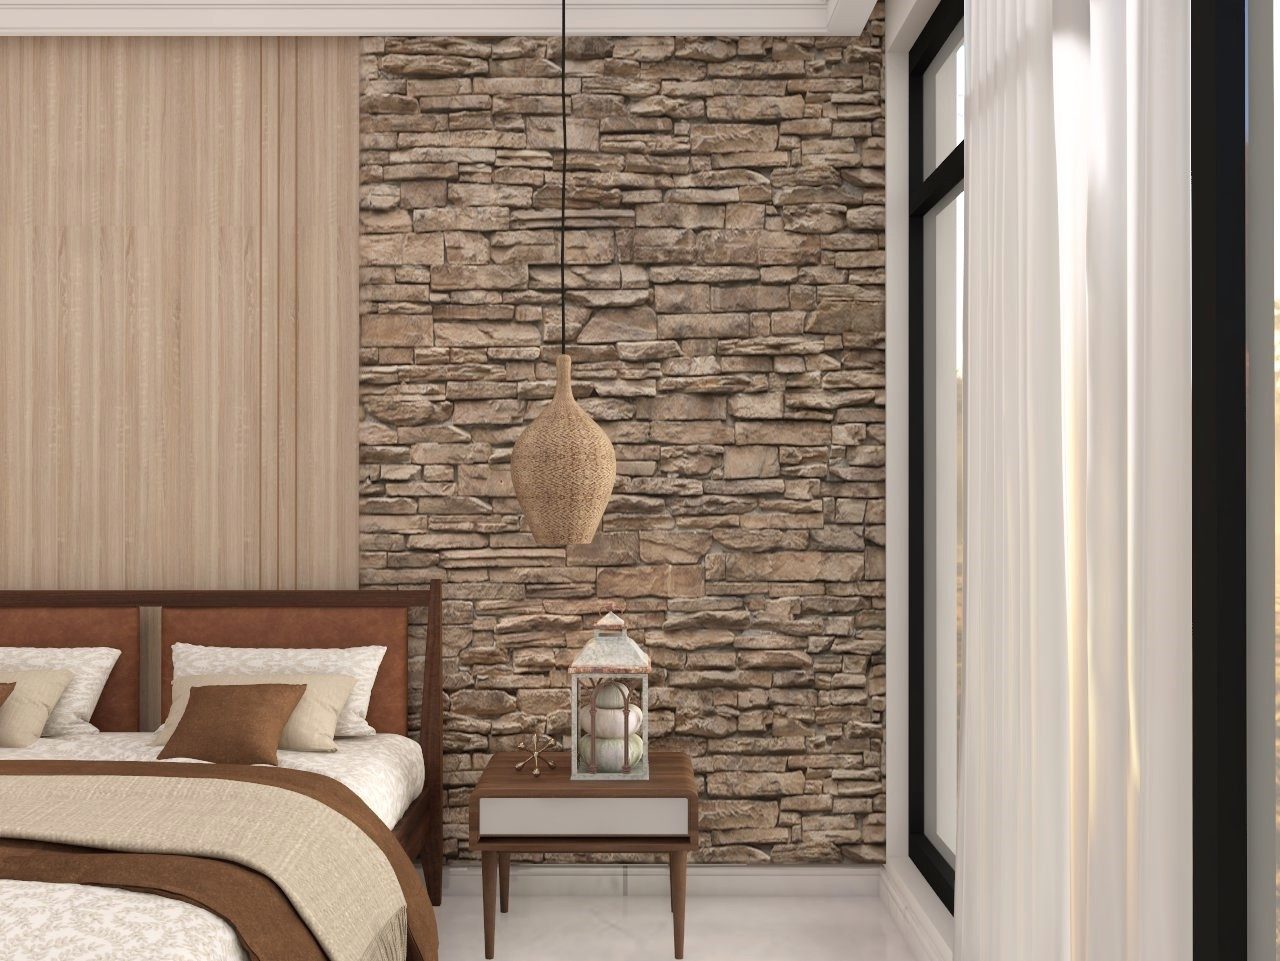 Bedroom wall design with brick patterned tiles - Beautiful Homes